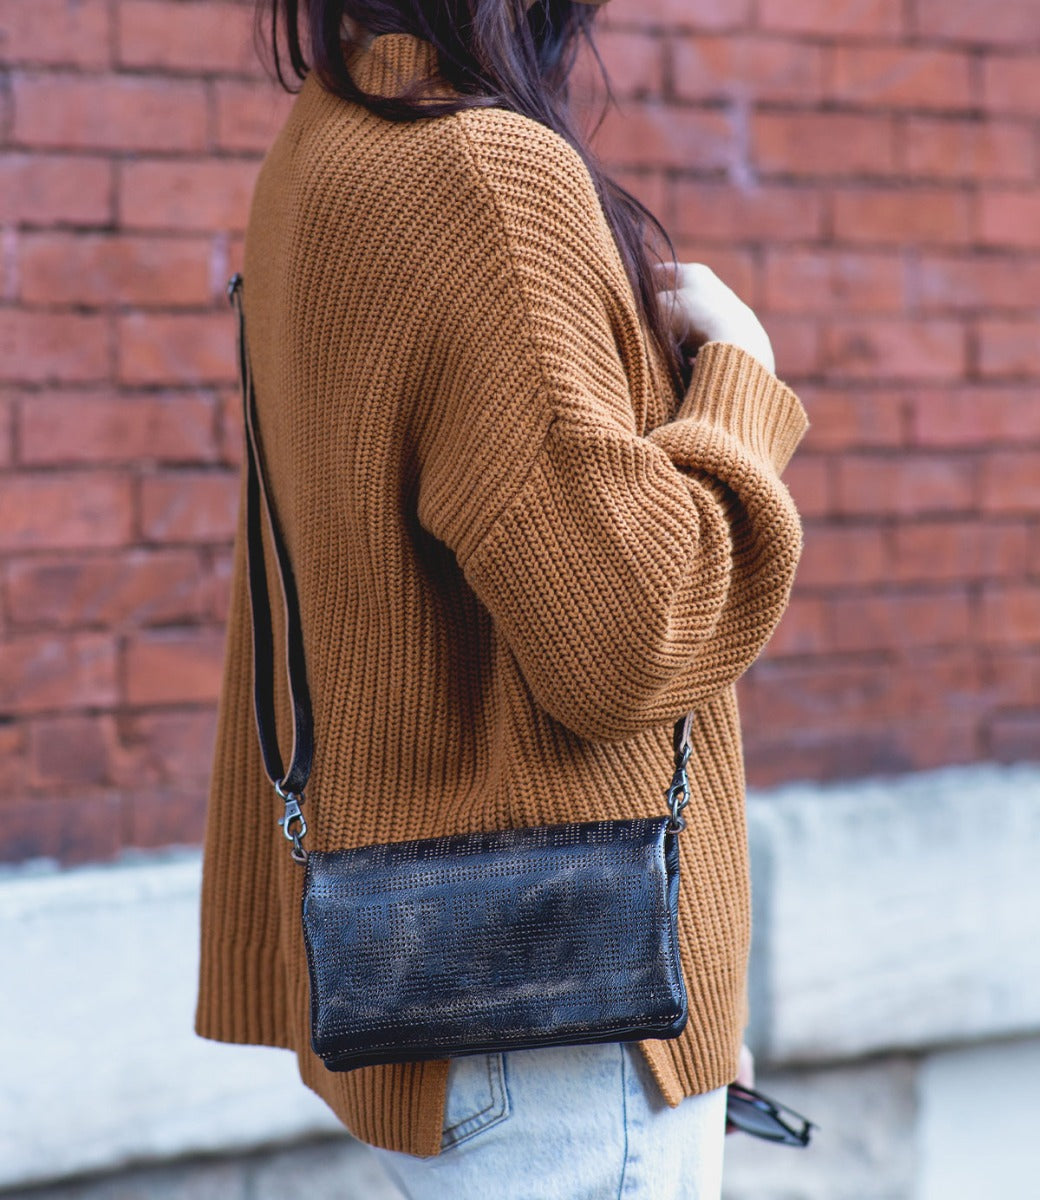 A woman wearing a tan sweater and jeans holding a Bed Stu Bayshore crossbody bag.